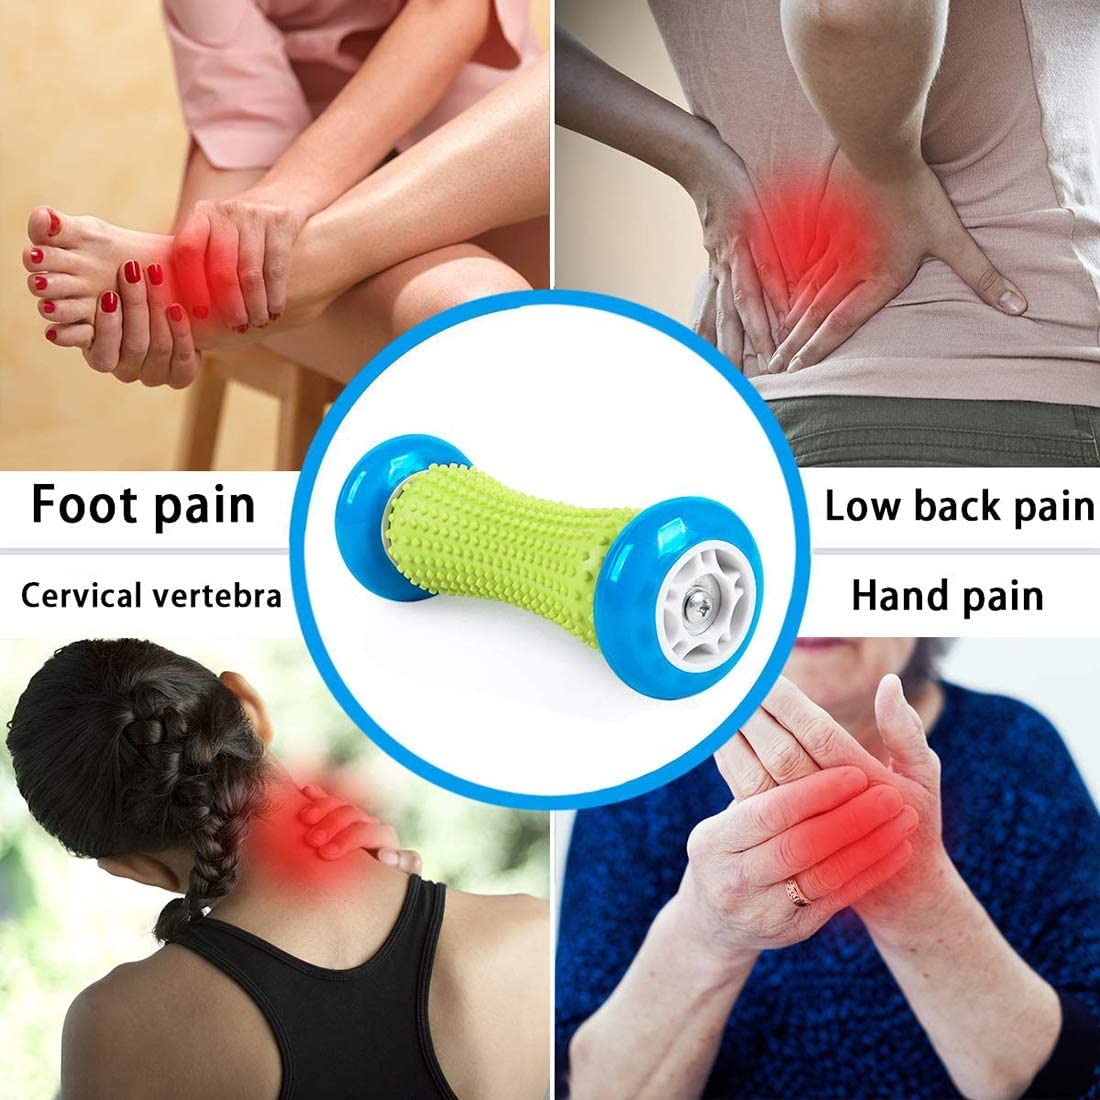 What Is Causing My Foot Pain? | Cardin & Miller PT